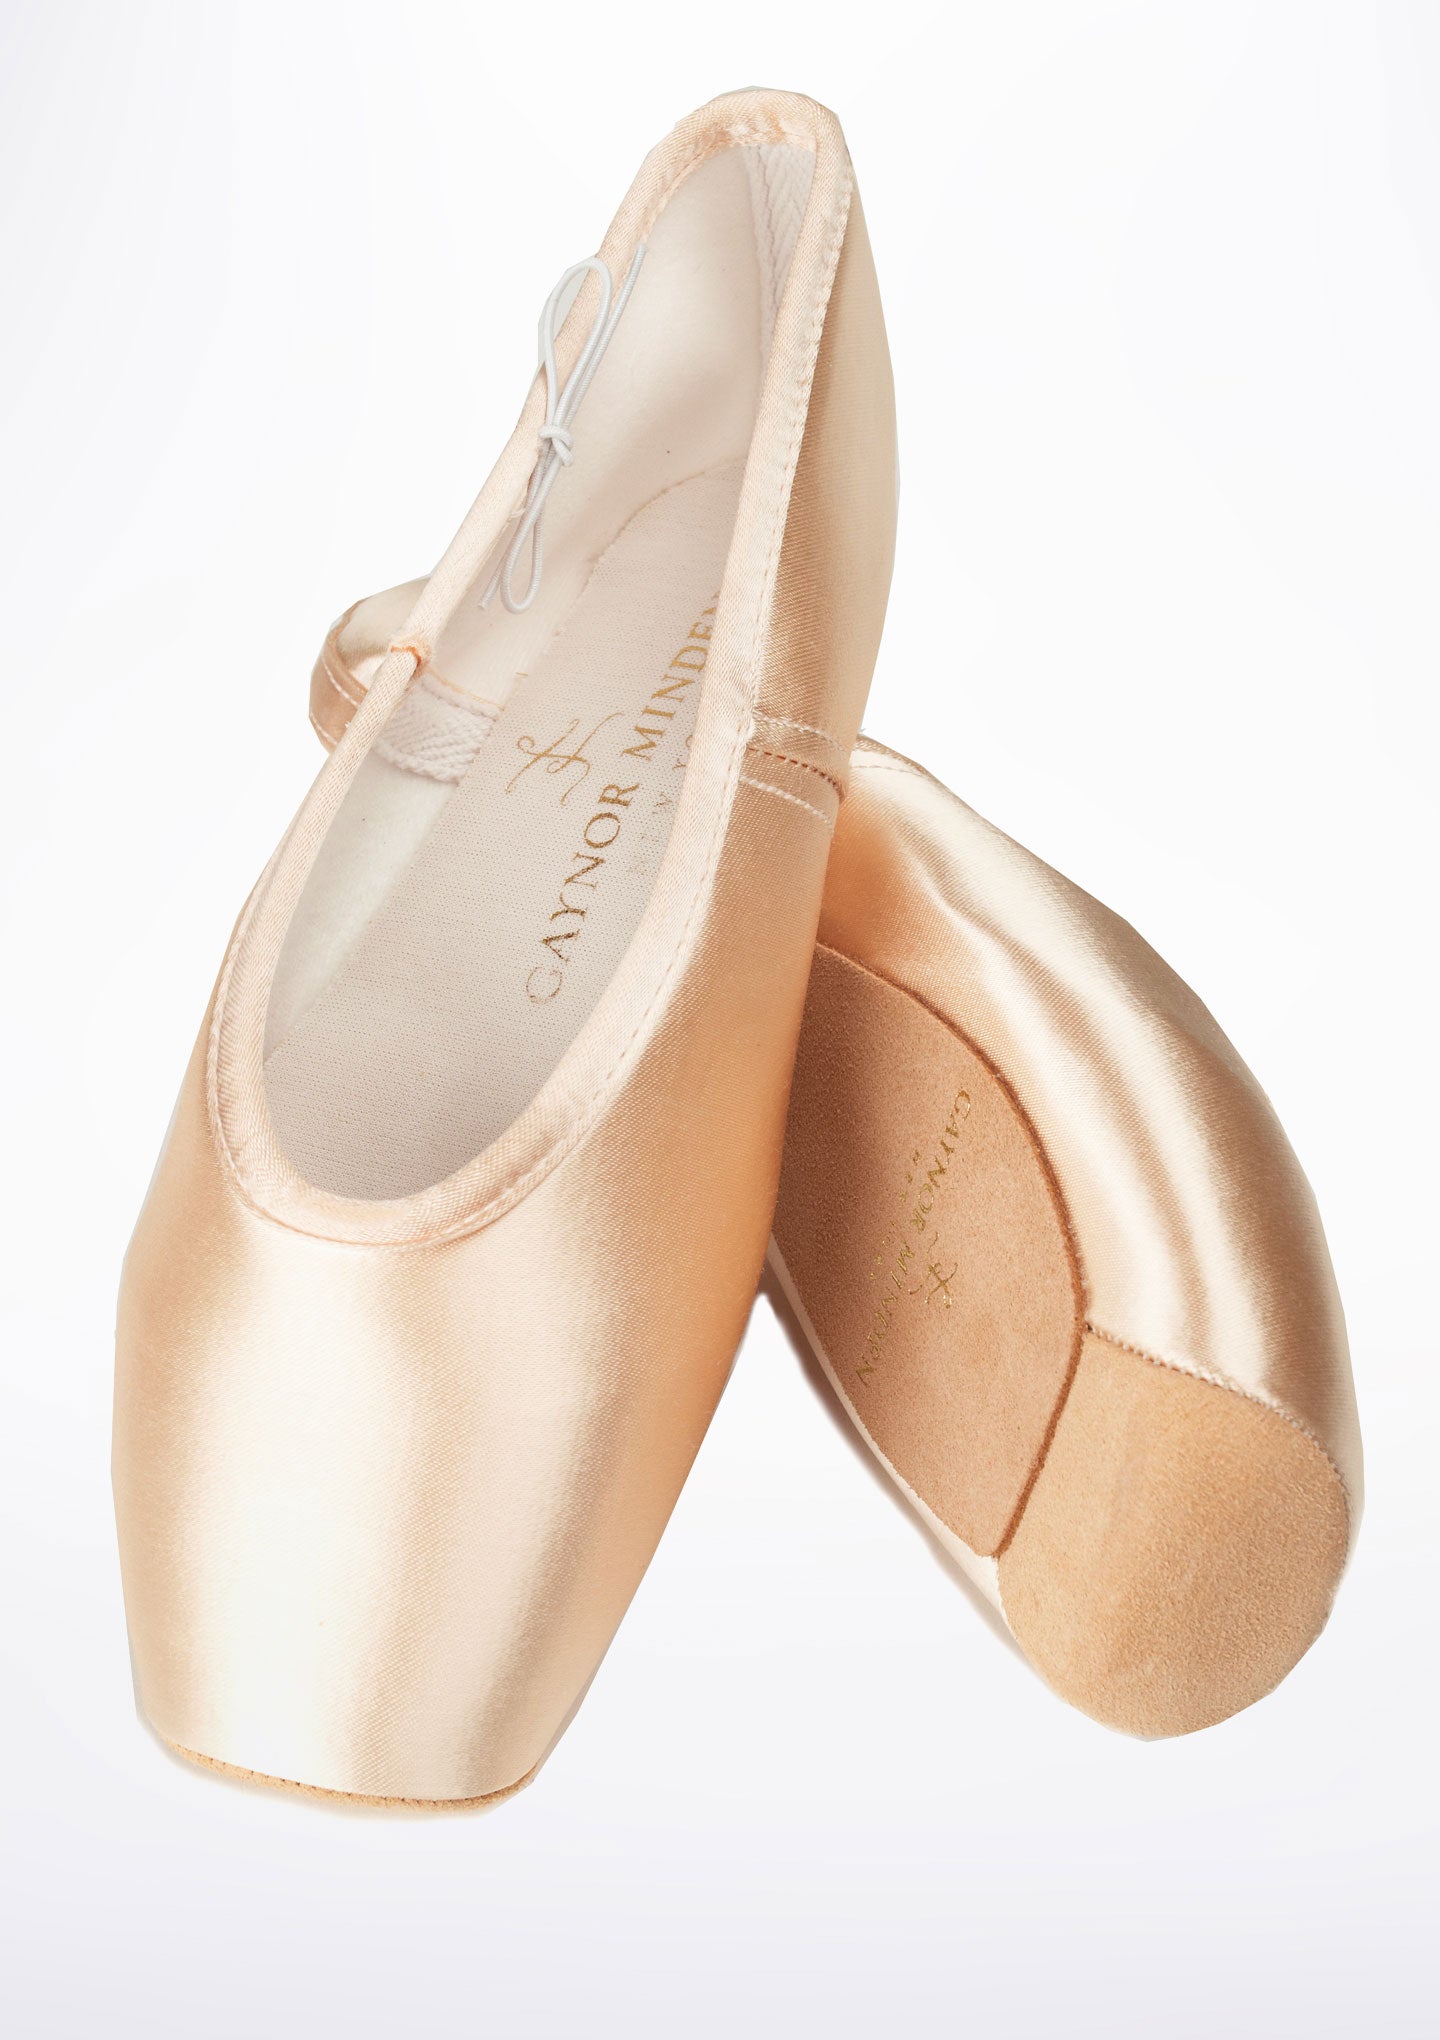 Gaynor Minden Pointe Shoe Classic (CL) 5 Hard (H) Pink